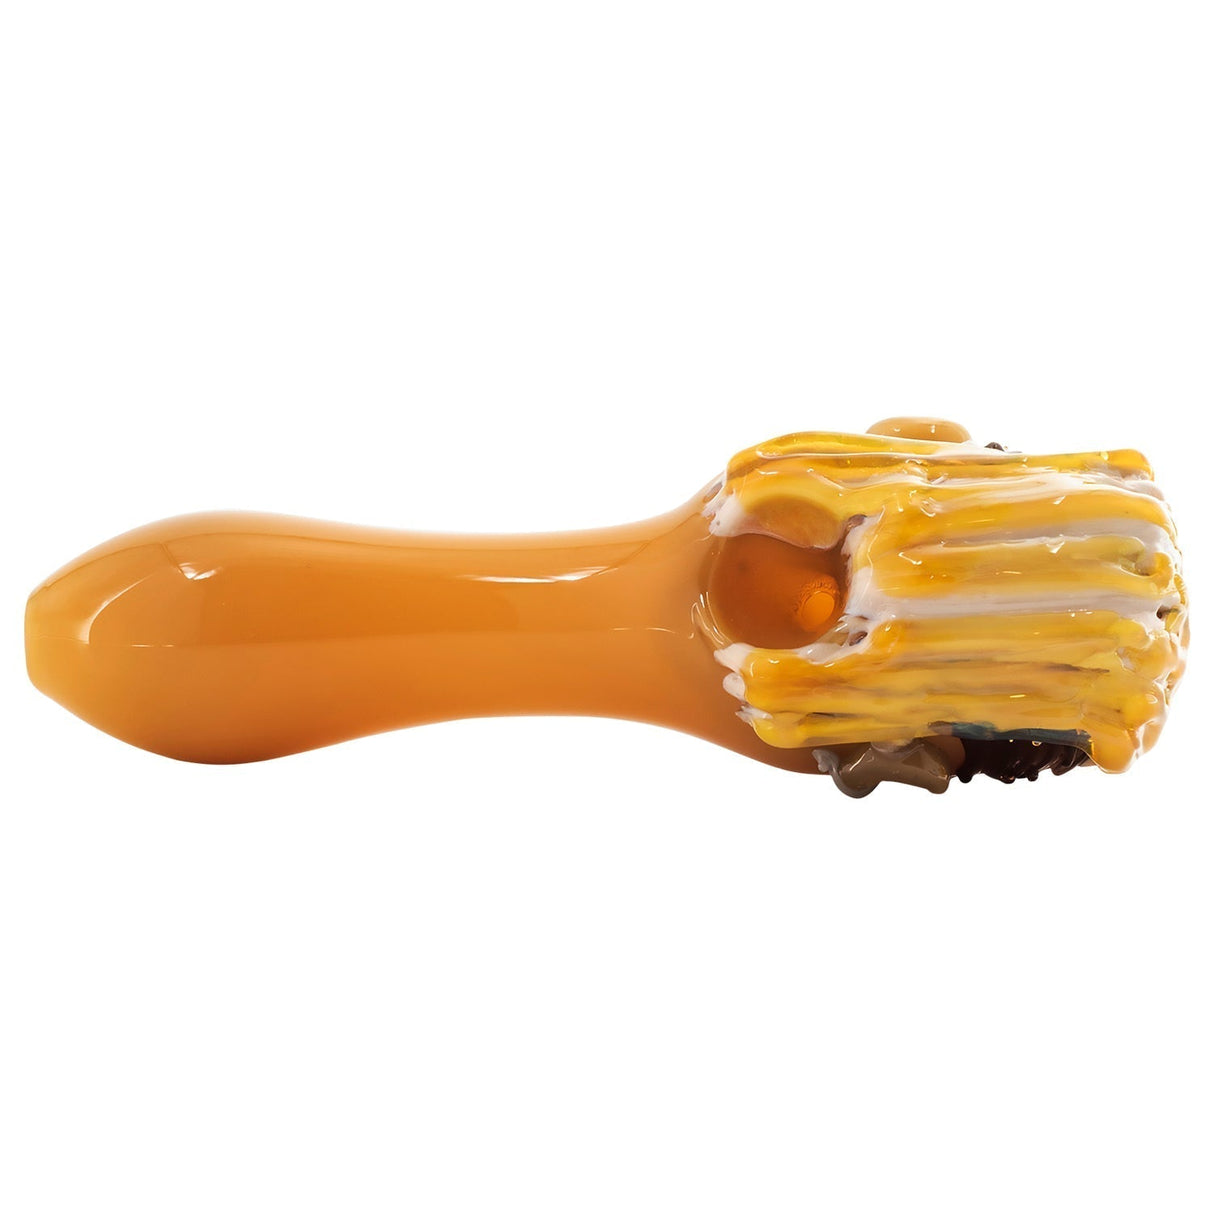 LA Pipes Joe Exotic Hand Pipe, 4" Borosilicate Glass, Side View on White Background